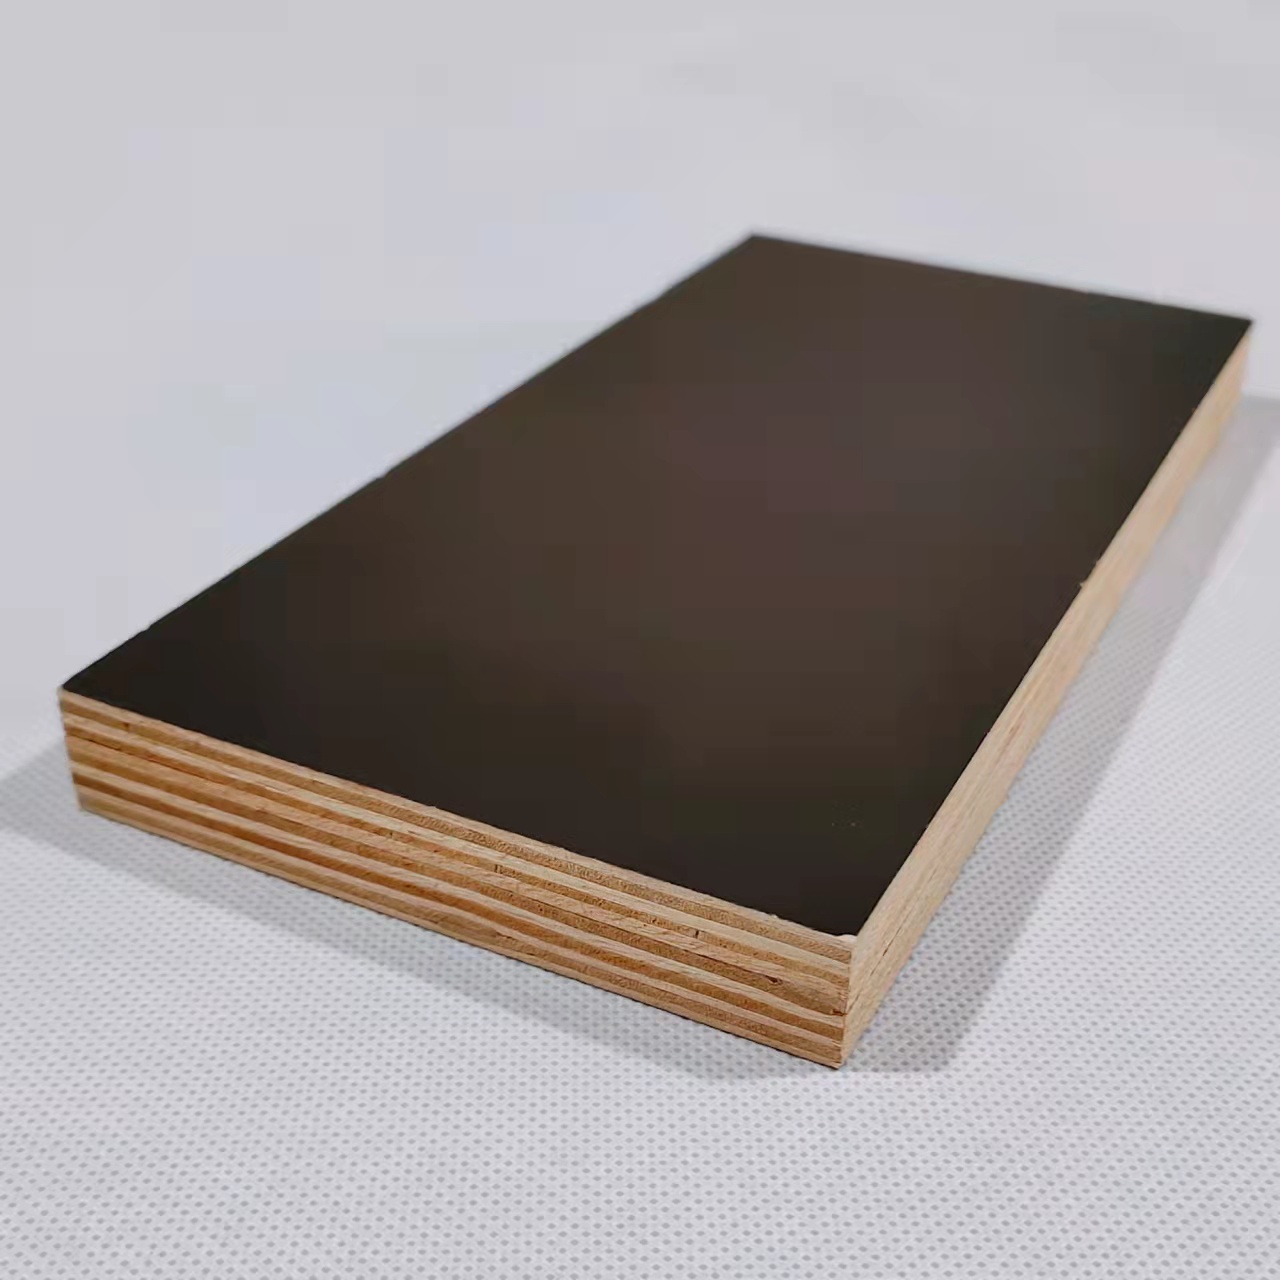 18mm Film Faced Plywood Film Faced Plywood Standert